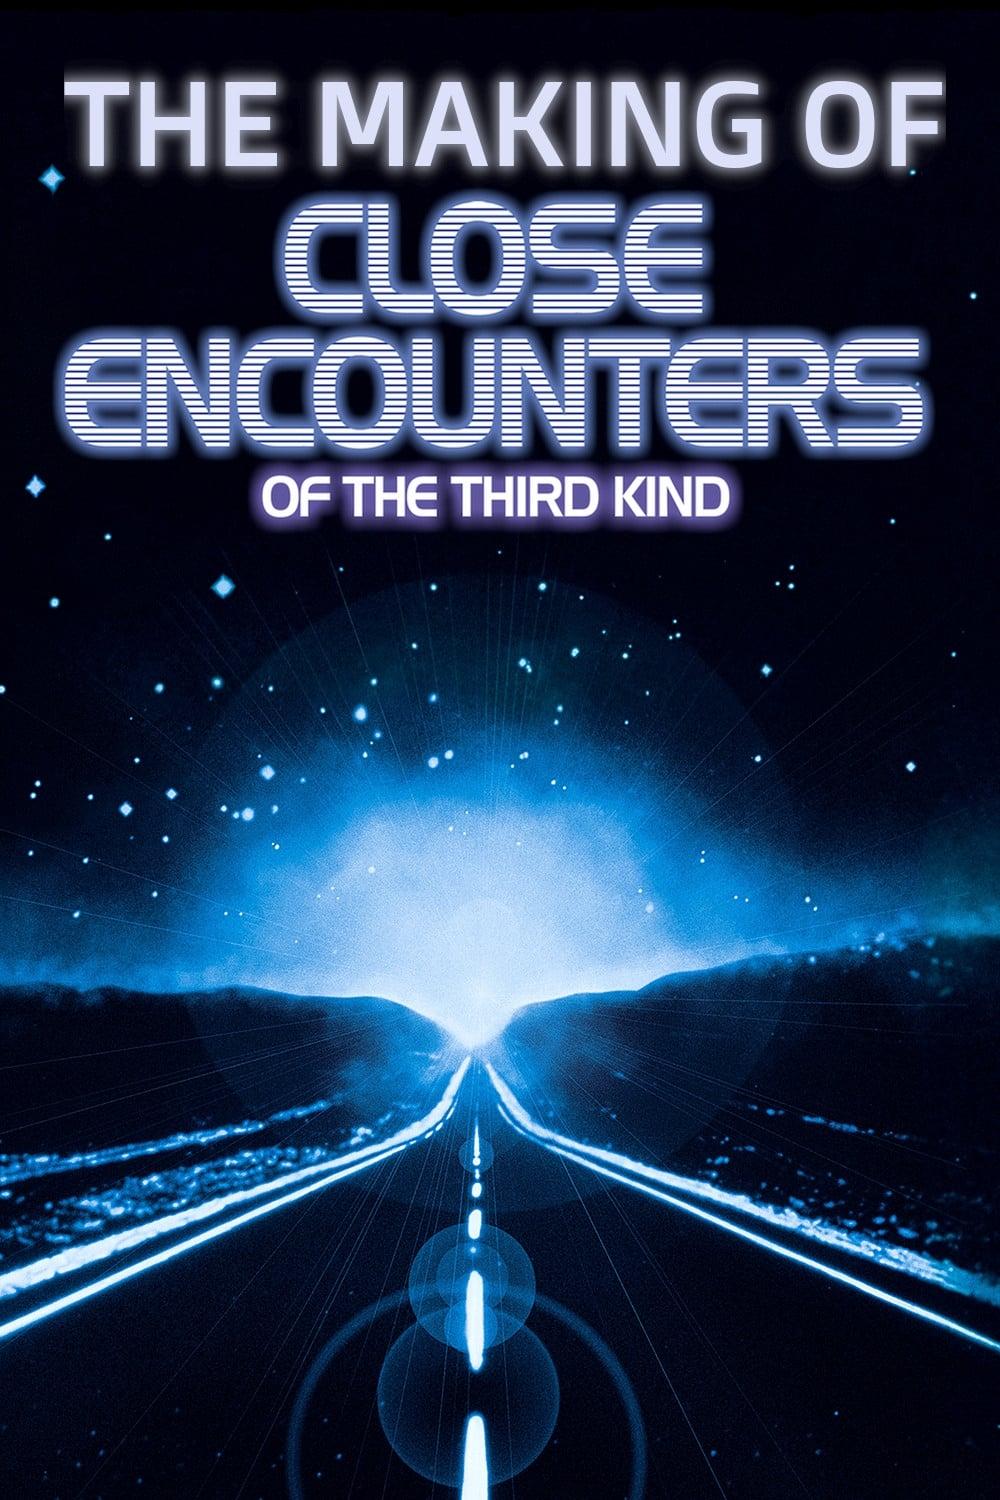 The Making of 'Close Encounters of the Third Kind' poster